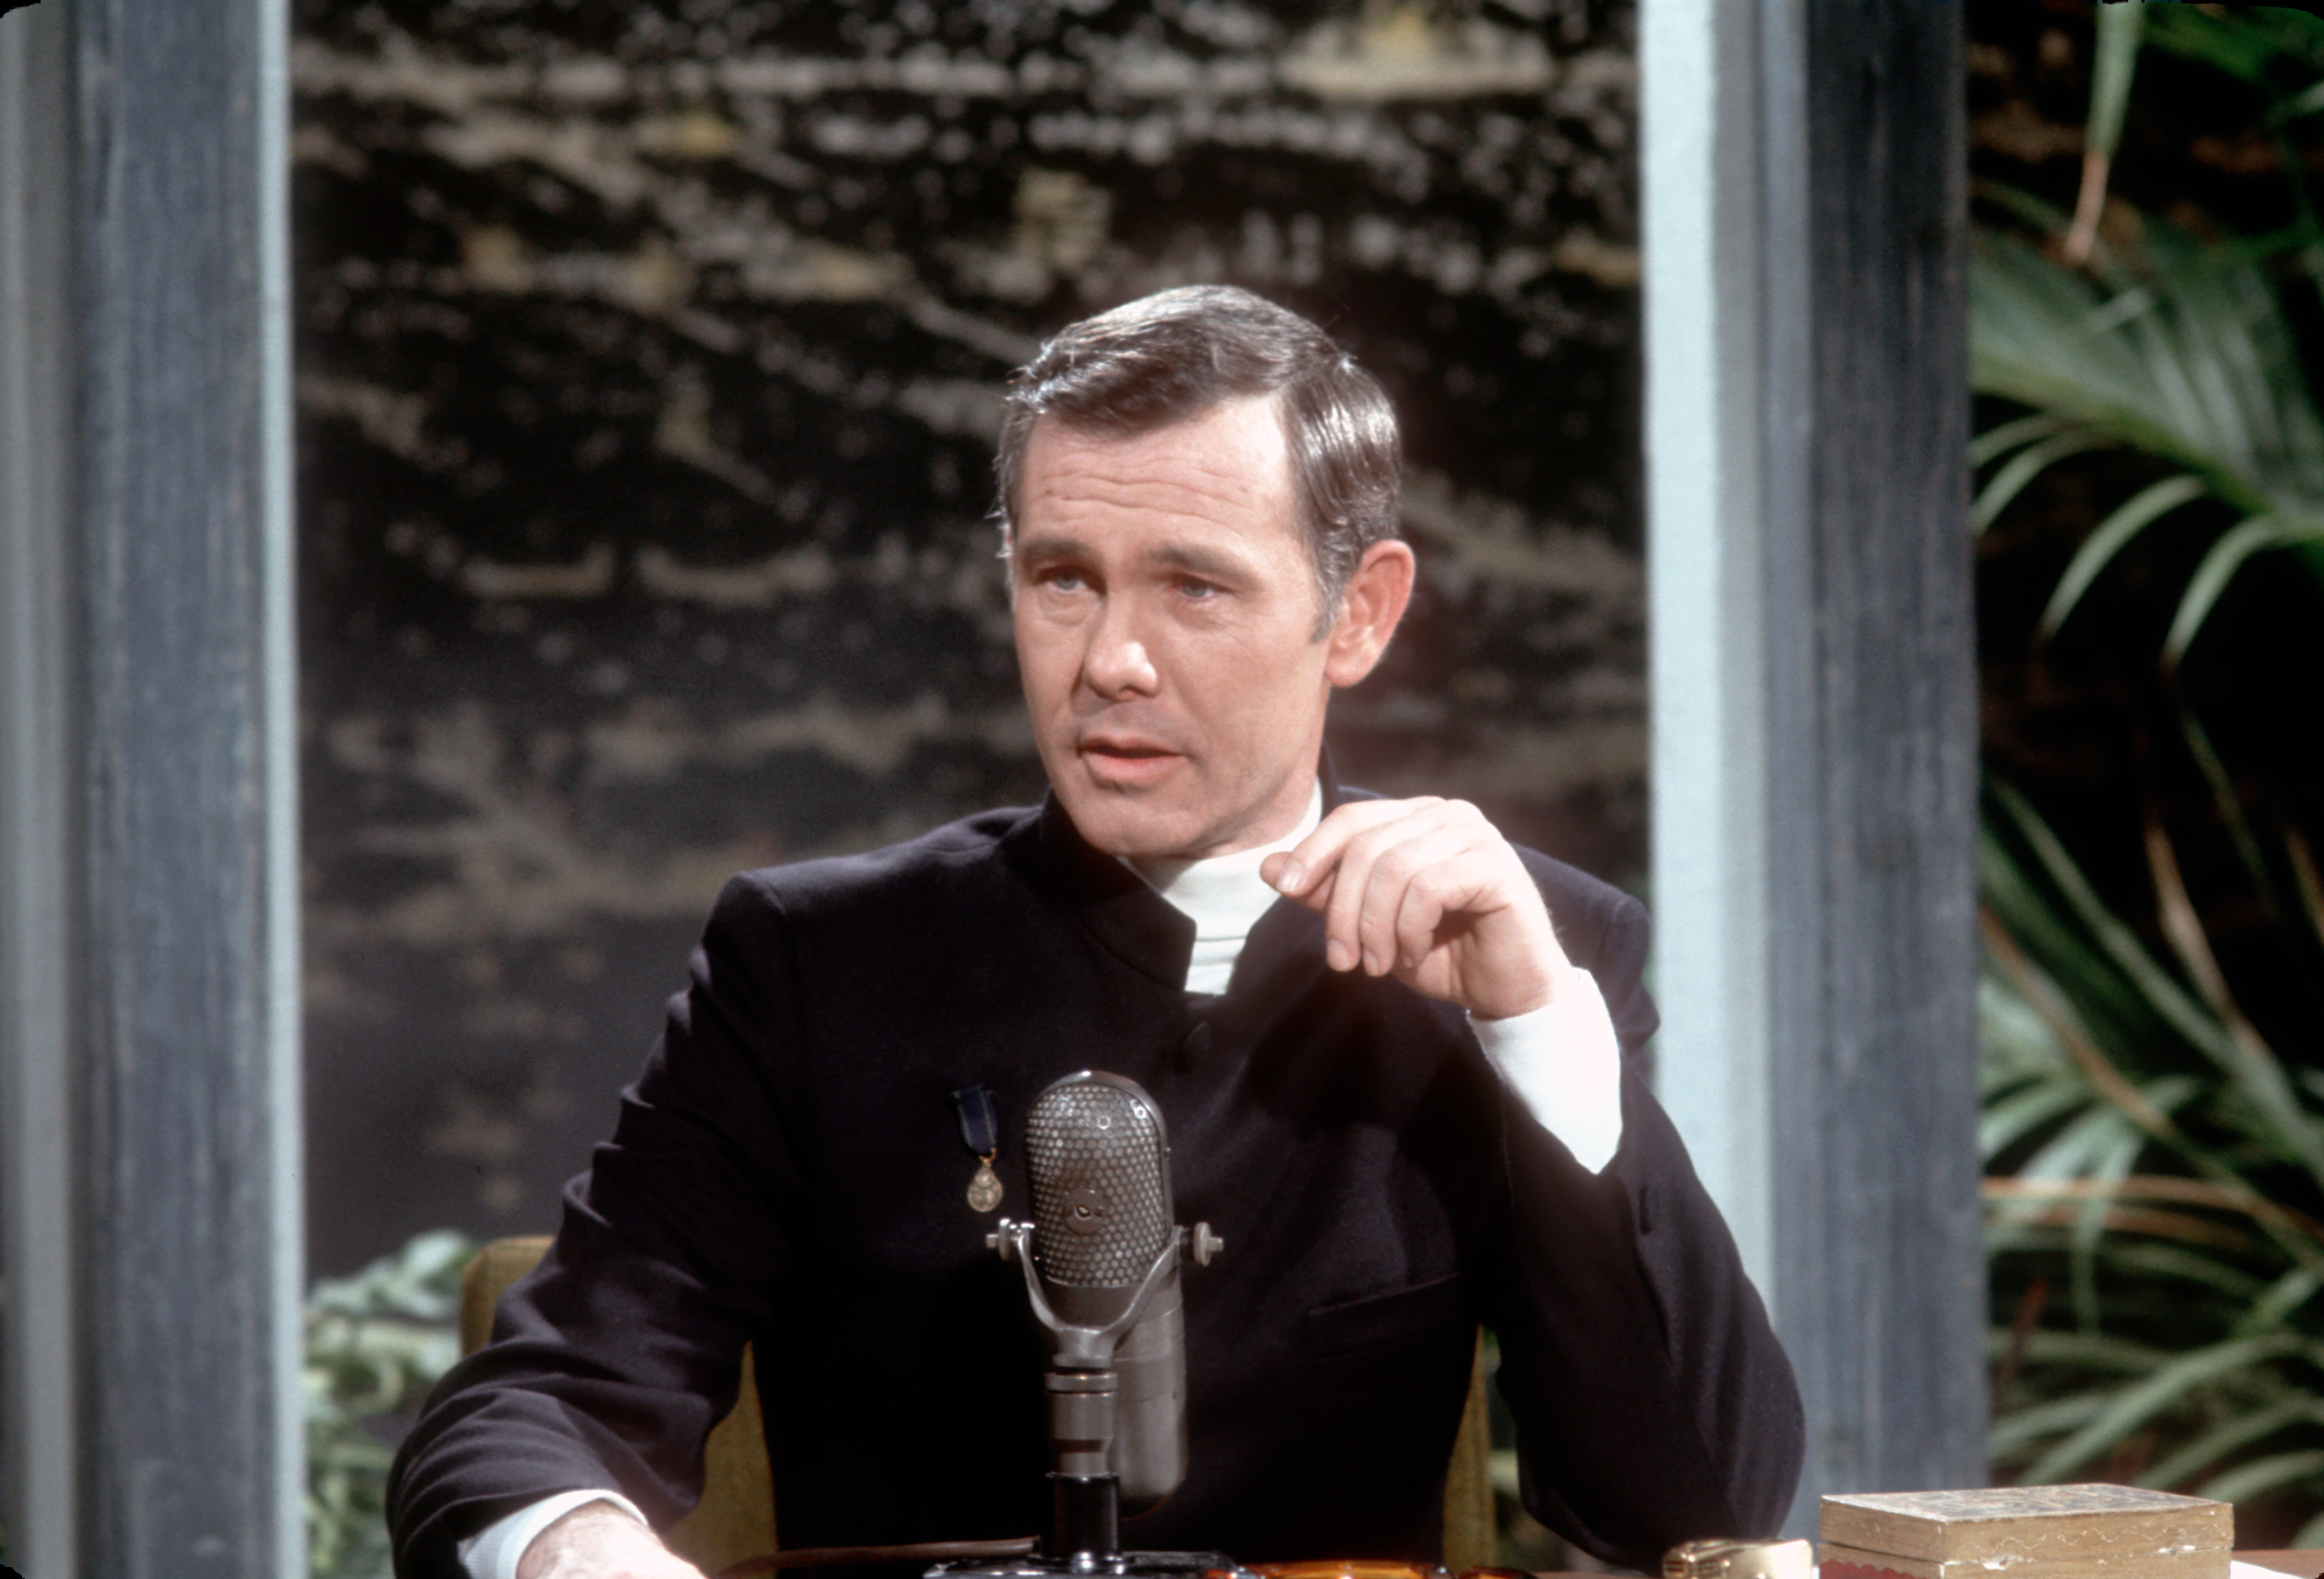 Johnny Carson circa 1960. | Source: Getty Images